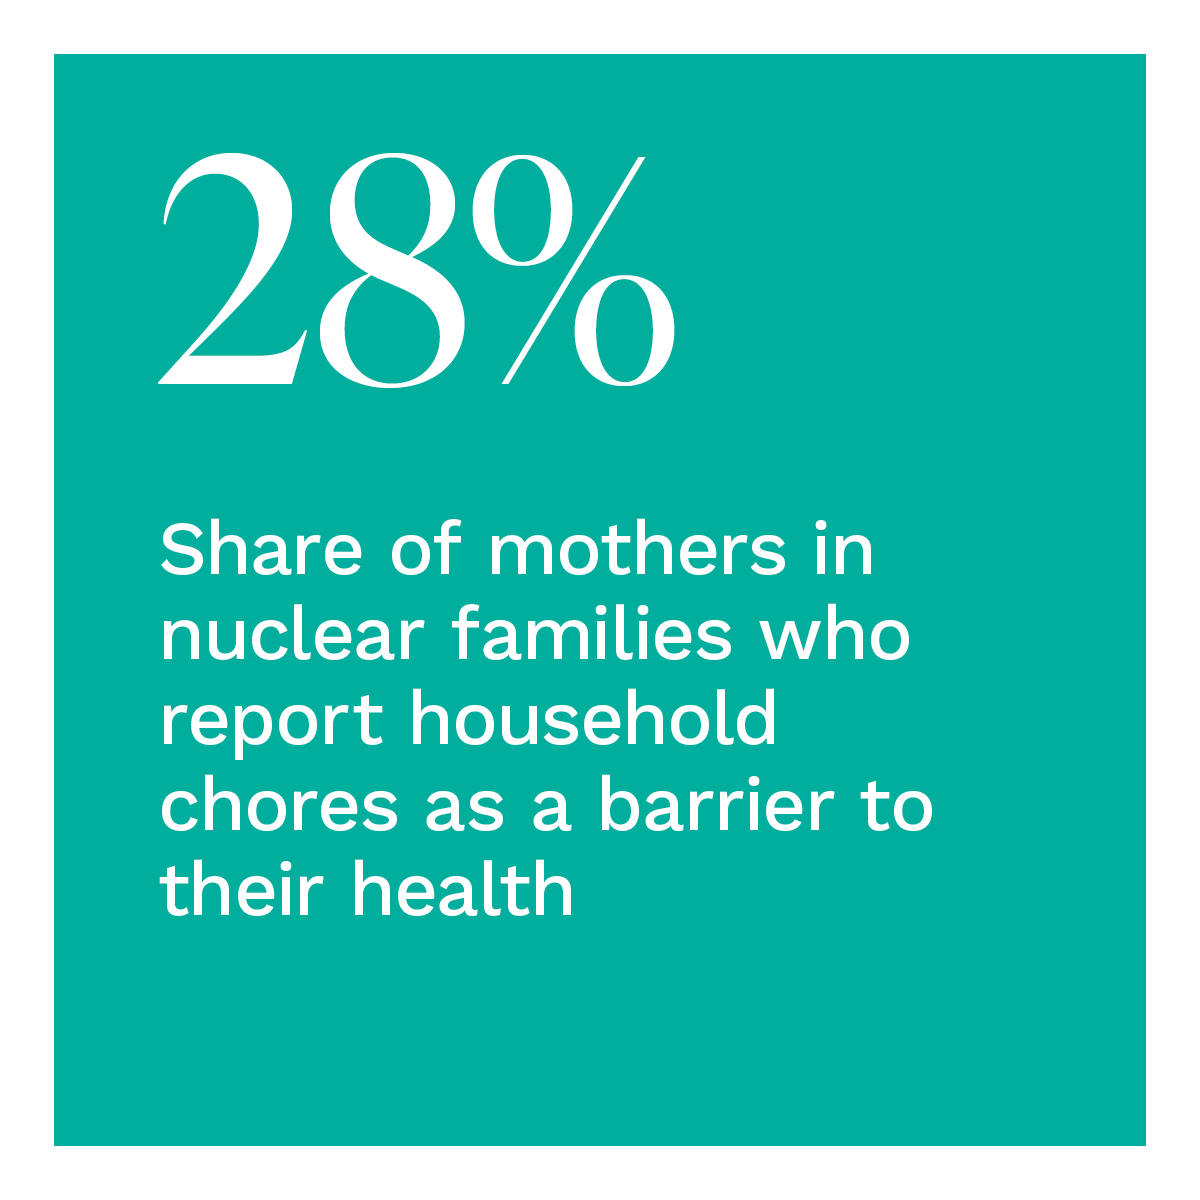 28%: Share of mothers in nuclear families who report household chores as a barrier to their health